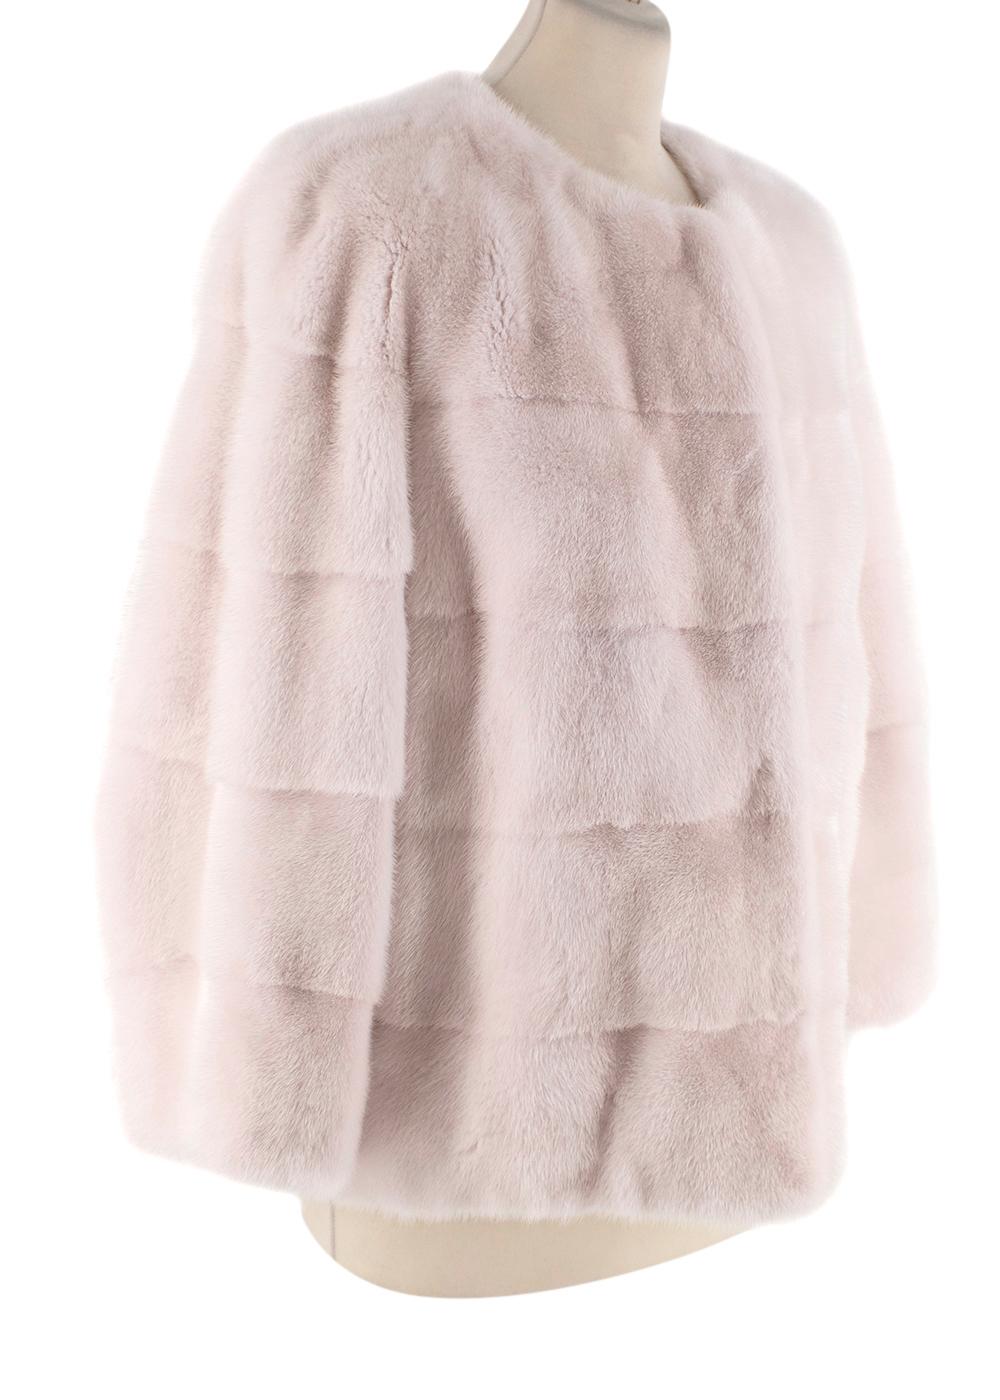 Lilly e Violetta Sarah Light Pink Cropped Mink Jacket

- Light pink mink collarless jacket
- Hook and eye front fastening 
- Bracelet length sleeves
- Cropped to the waist/ high hip
- Two slit pockets
- Fully lined

Materials:
Mink
Silk Blend

Made